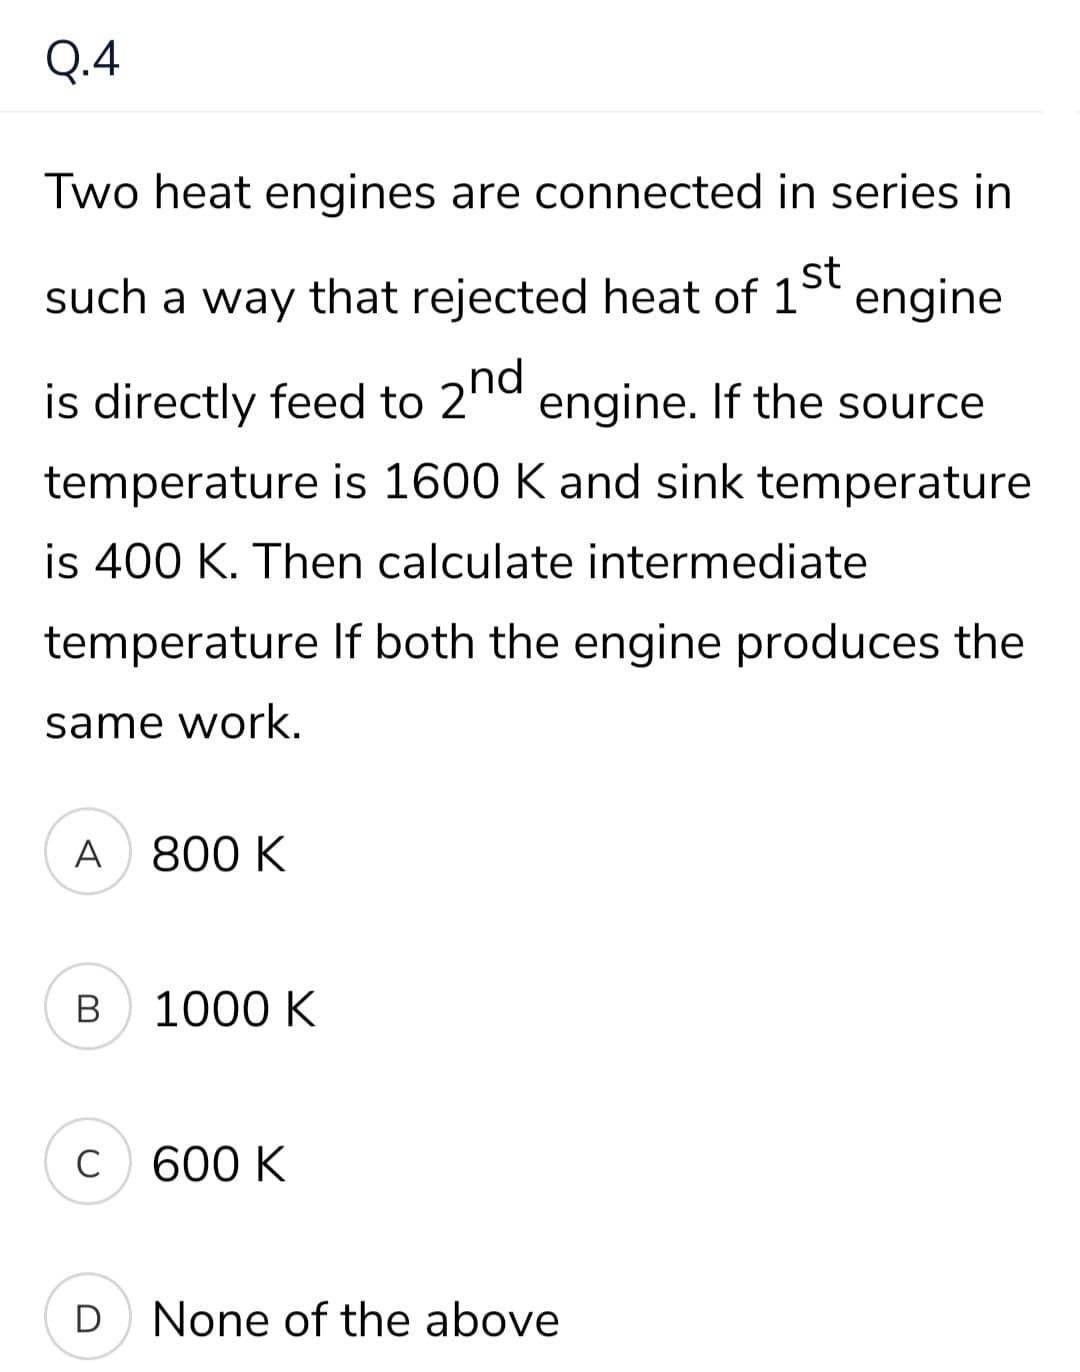 Q.4
Two heat engines are connected in series in
st
such a way that rejected heat of 1° engine
is directly feed to 2'1d engine. If the source
temperature is 1600 K and sink temperature
is 400 K. Then calculate intermediate
temperature If both the engine produces the
same work.
A
800 K
B
1000 K
600 K
D
None of the above
